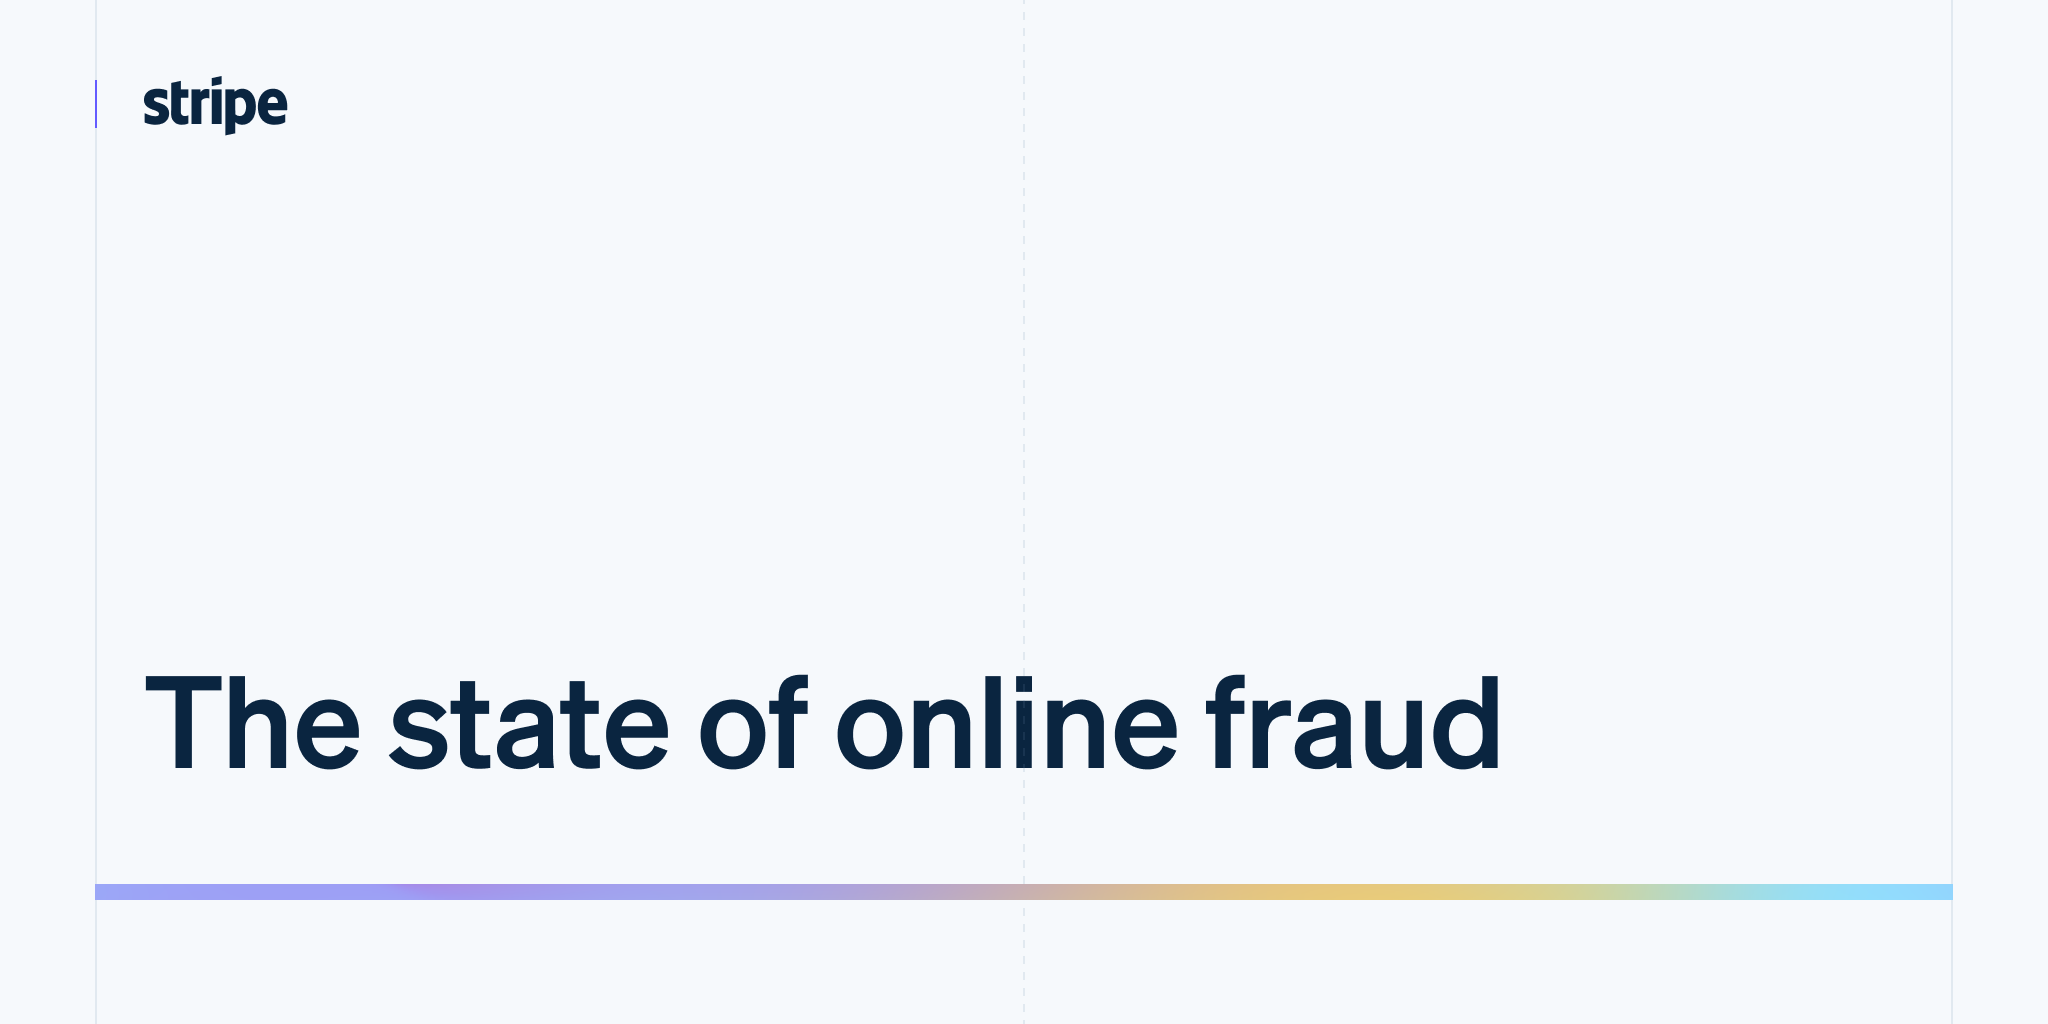 Stripe: The state of online fraud